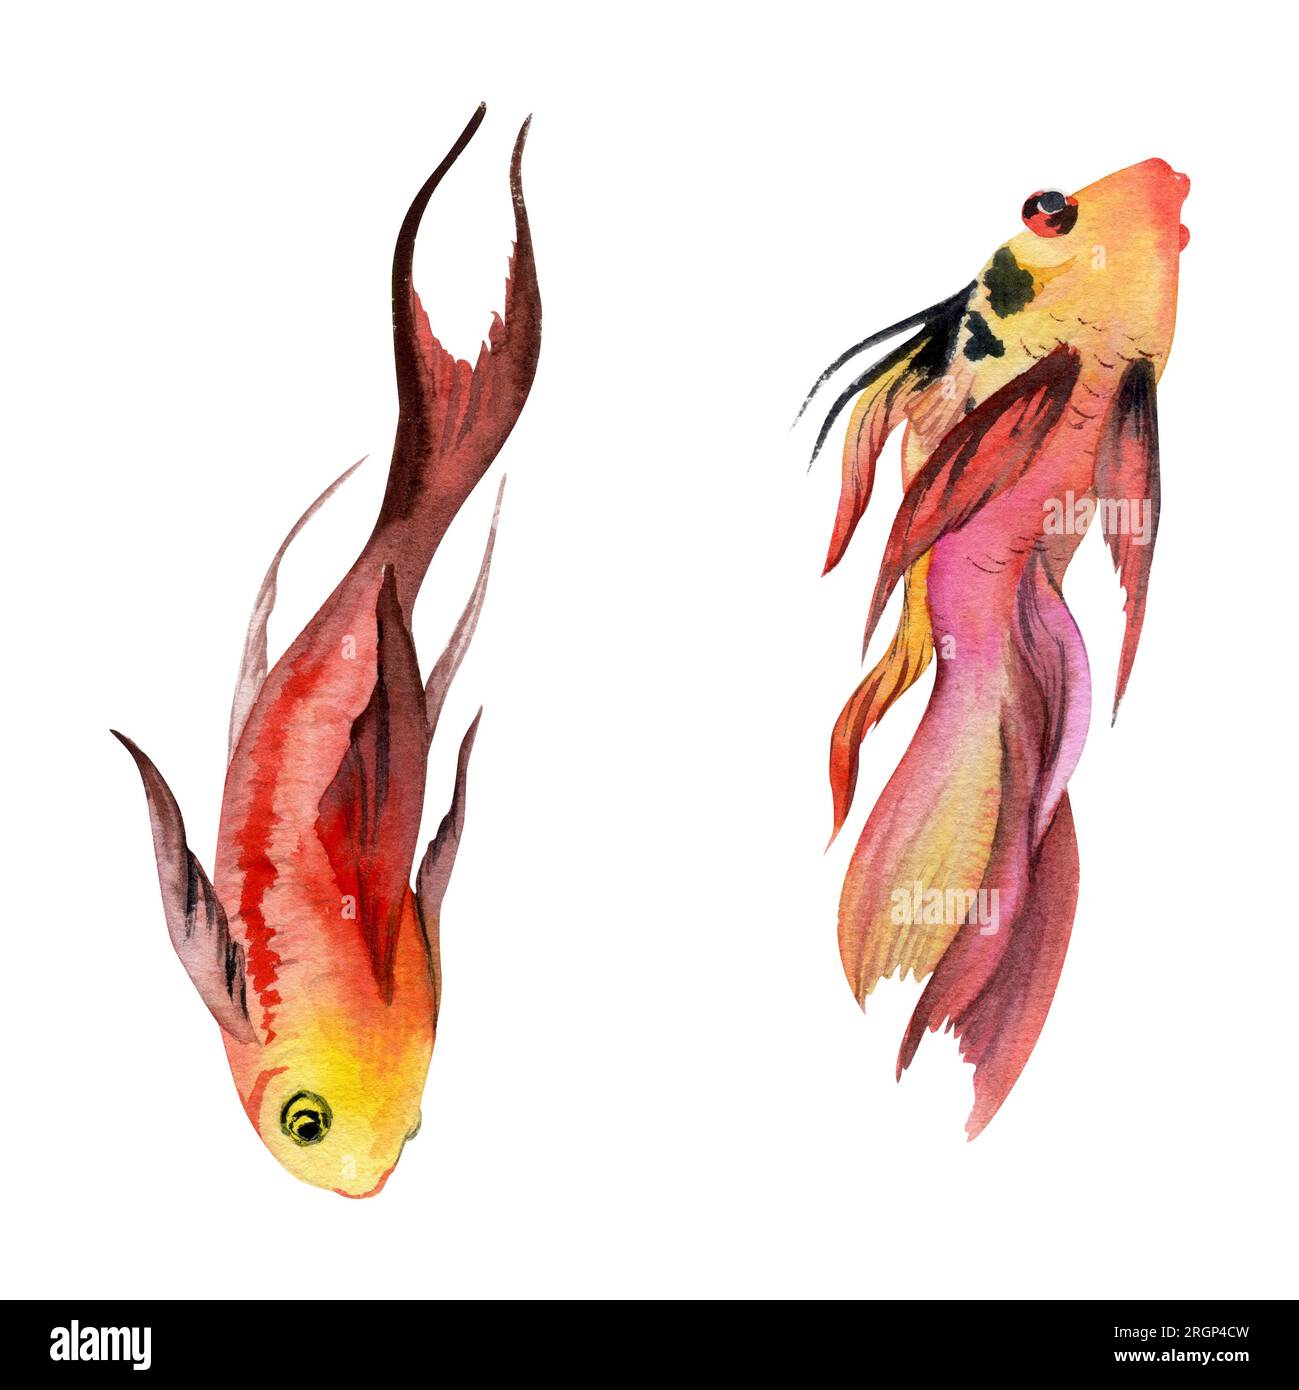 Hand drawn watercolor aquarium tropical fish swordtail sealife. Marine exotic underwater illustration. Isolated object on white background. Design for Stock Photo